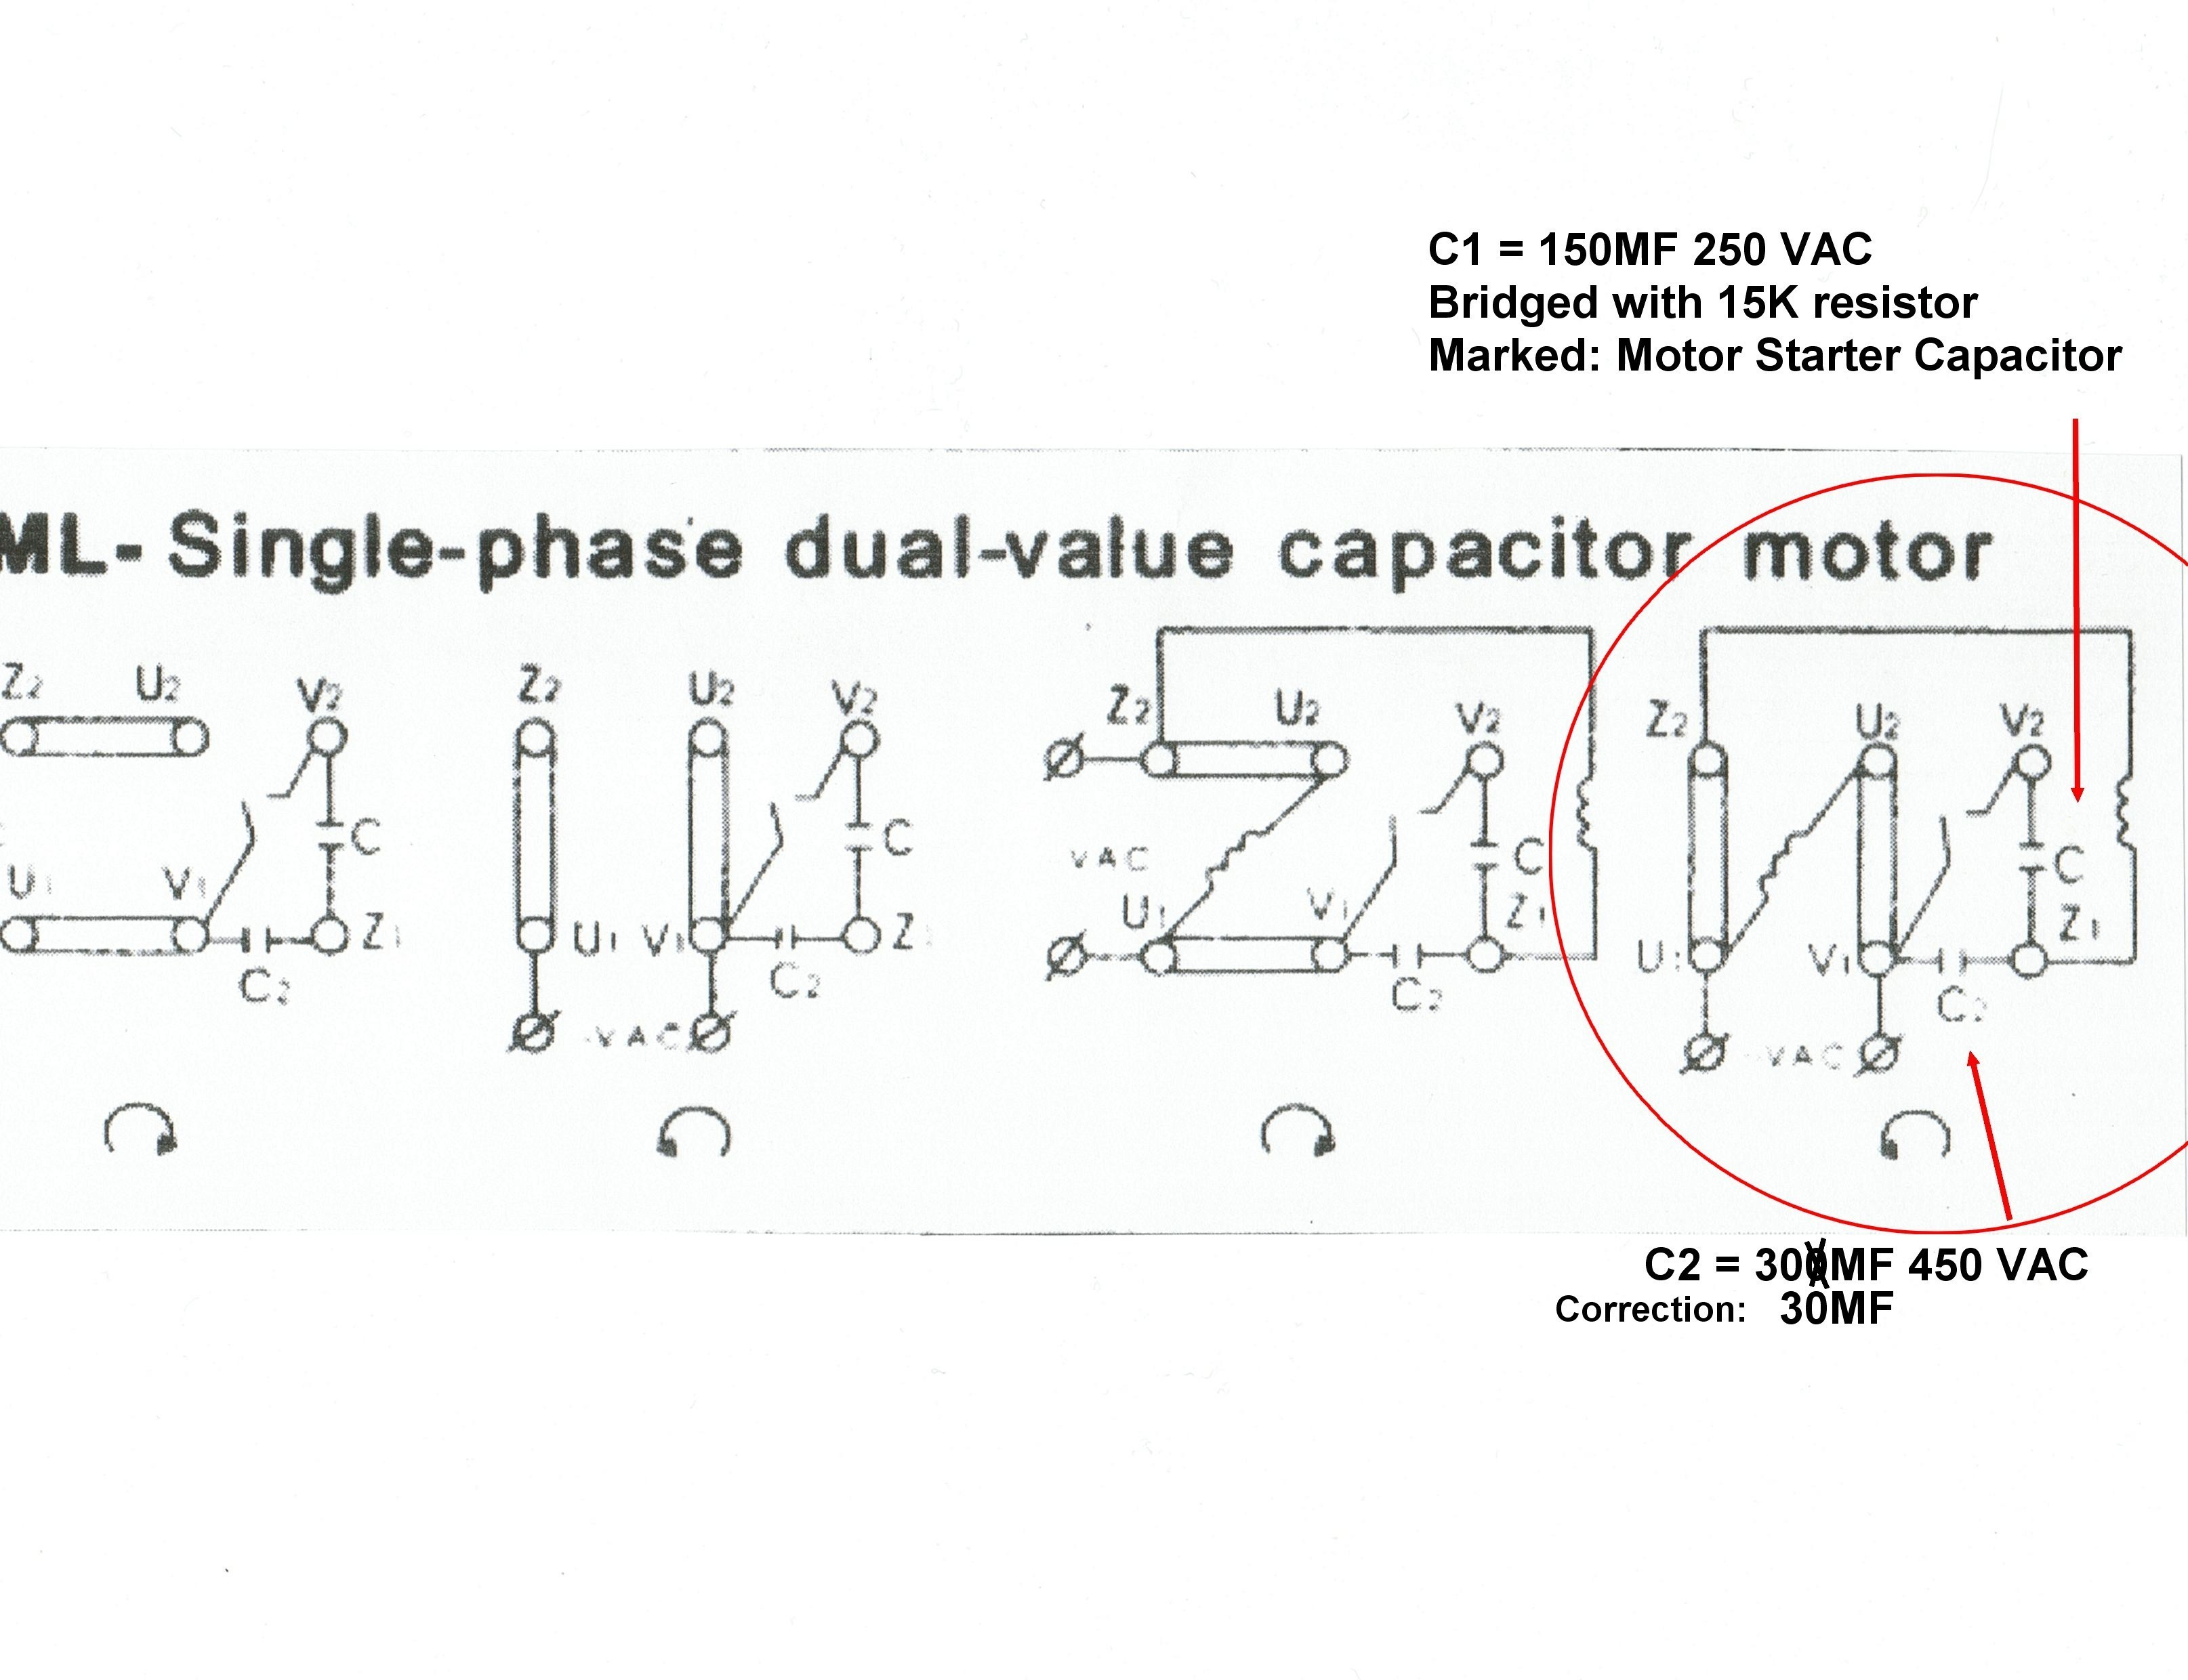 Run Capacitor Wiring Diagram For Ac Unit Cost Start Air Compressor - Motor Capacitor Wiring Diagram